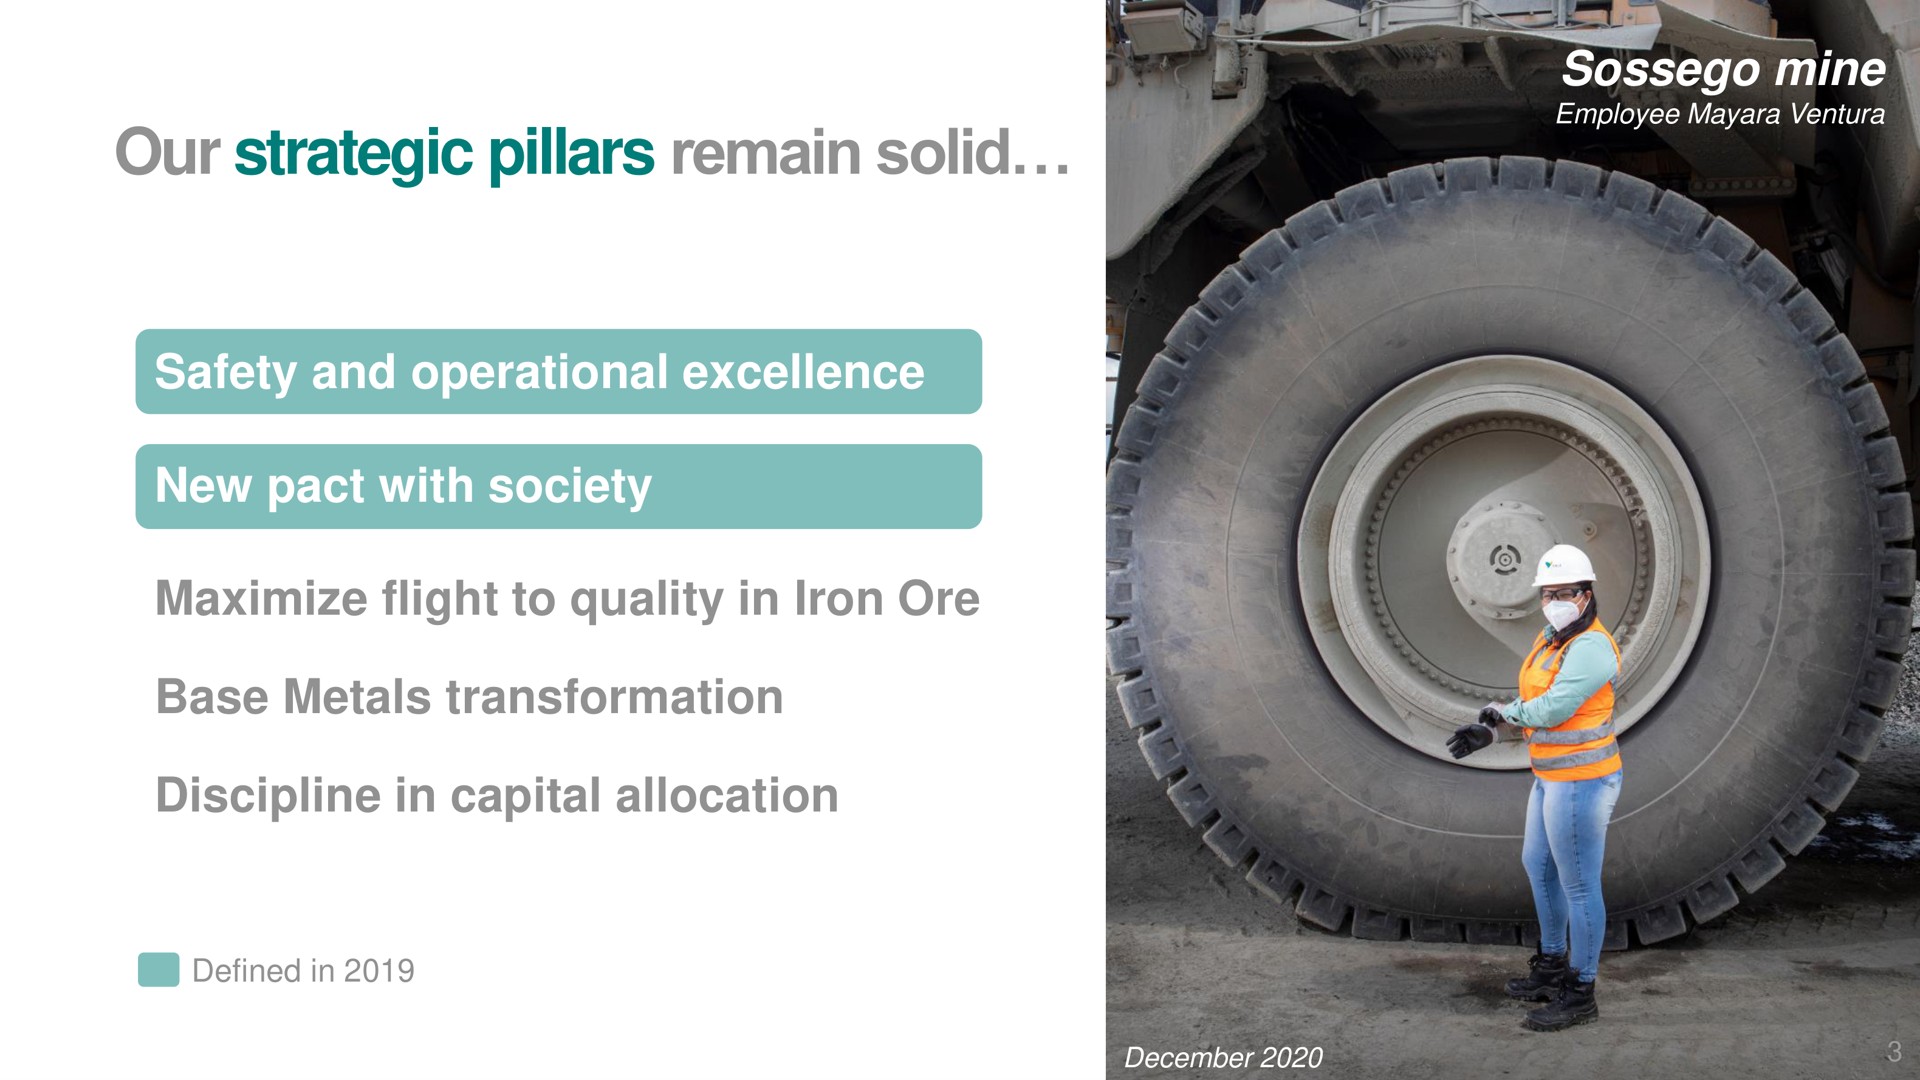 our strategic pillars remain solid mine safety and operational excellence new pact with society maximize flight to quality in iron ore base metals transformation discipline in capital allocation | Vale